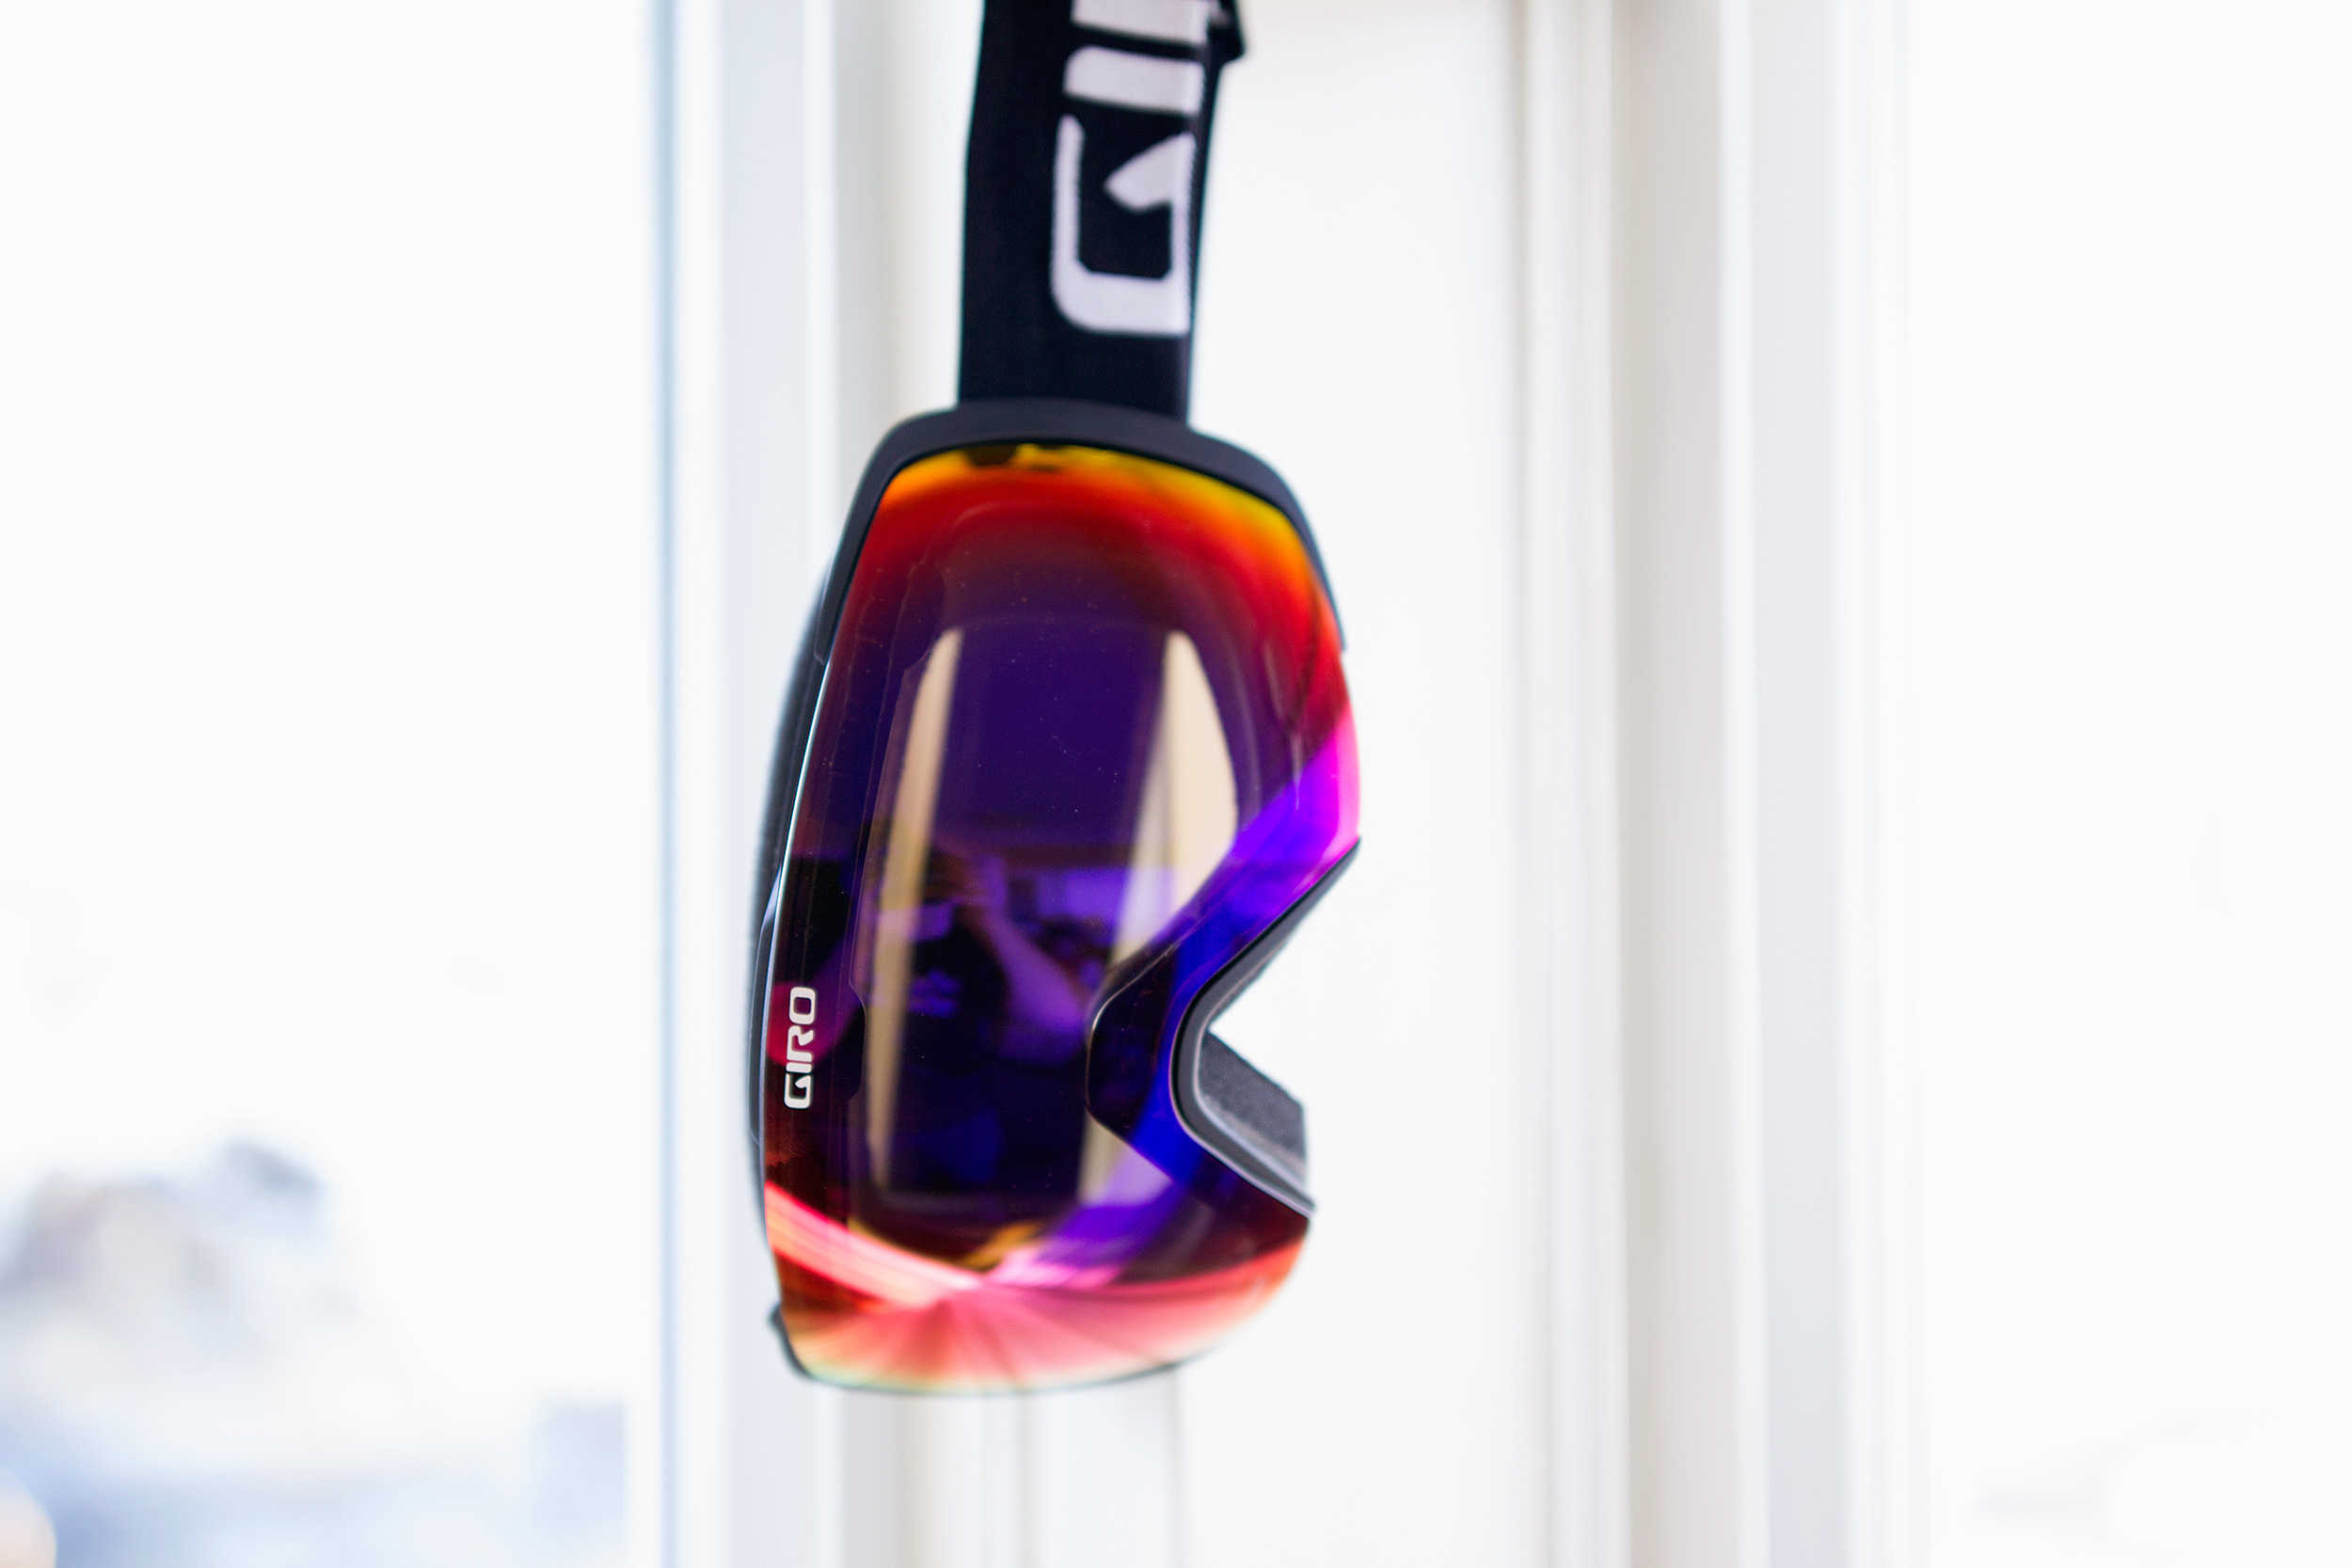 Giro's Contact snow goggles utilize one of Apple's favorite things: magnets.